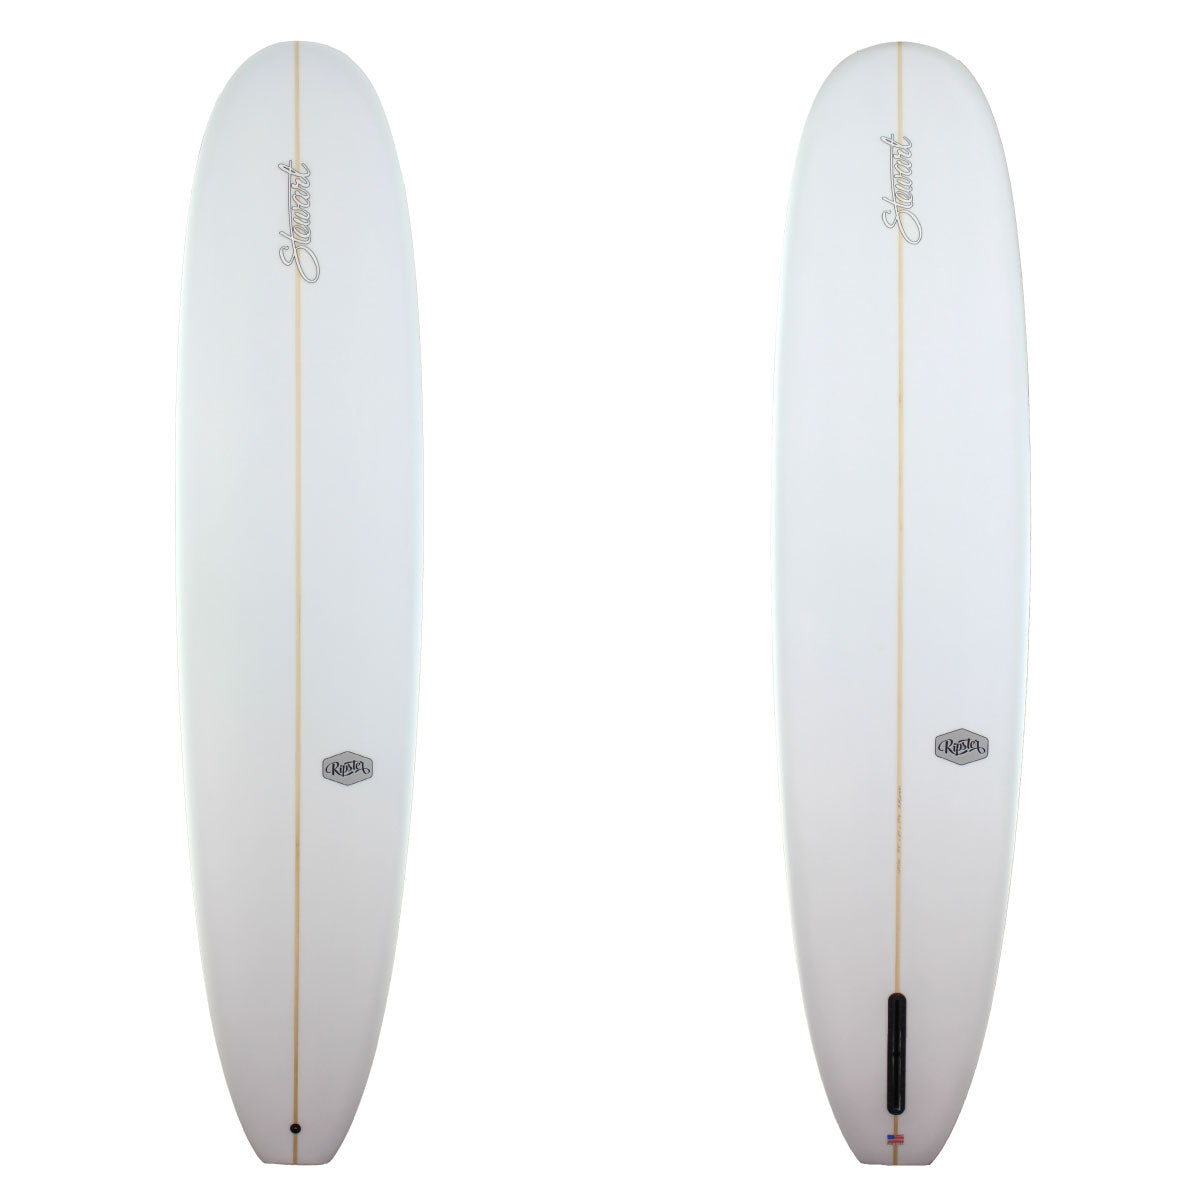 Stewart Surfboards 9'8 Ripster with clear white deck and bottom